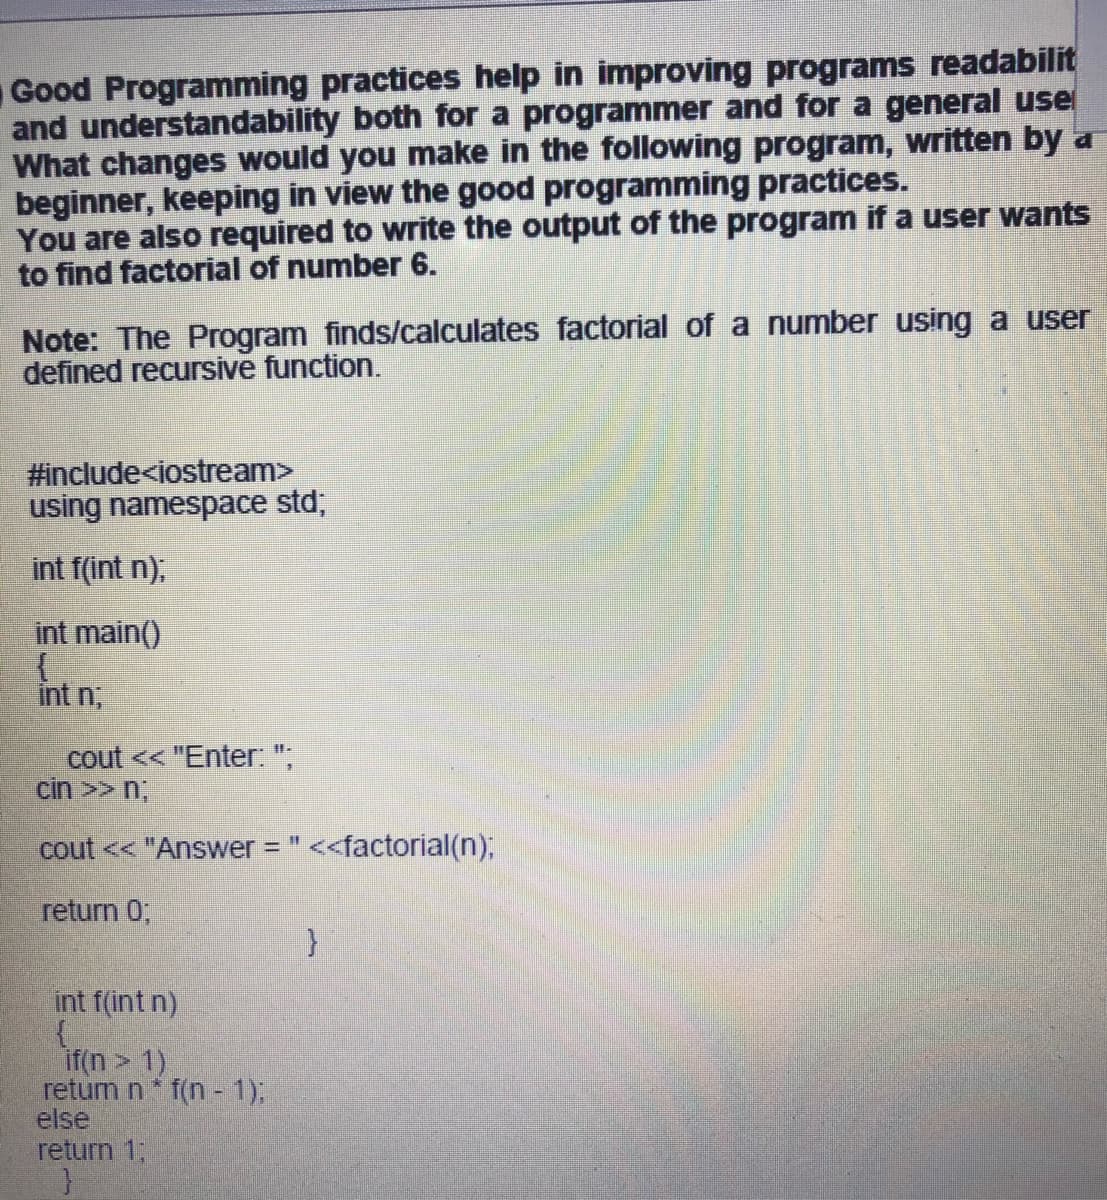 Good Programming practices help in improving programs readabilit
and understandability both for a programmer and for a general use
What changes would you make in the following program, written by a
beginner, keeping in view the good programming practices.
You are also required to write the output of the program if a user wants
to find factorial of number 6.
Note: The Program finds/calculates factorial of a number using a user
defined recursive function.
#include<iostream>
using namespace std,
int f(int n),
int main()
int n,
cout << "Enter. ";
cin >> n,
cout << "Answer "
<factorial(n);
return 0;
int f(int n)
if(n > 1)
retum n* f(n - 1),
else
return 1;
